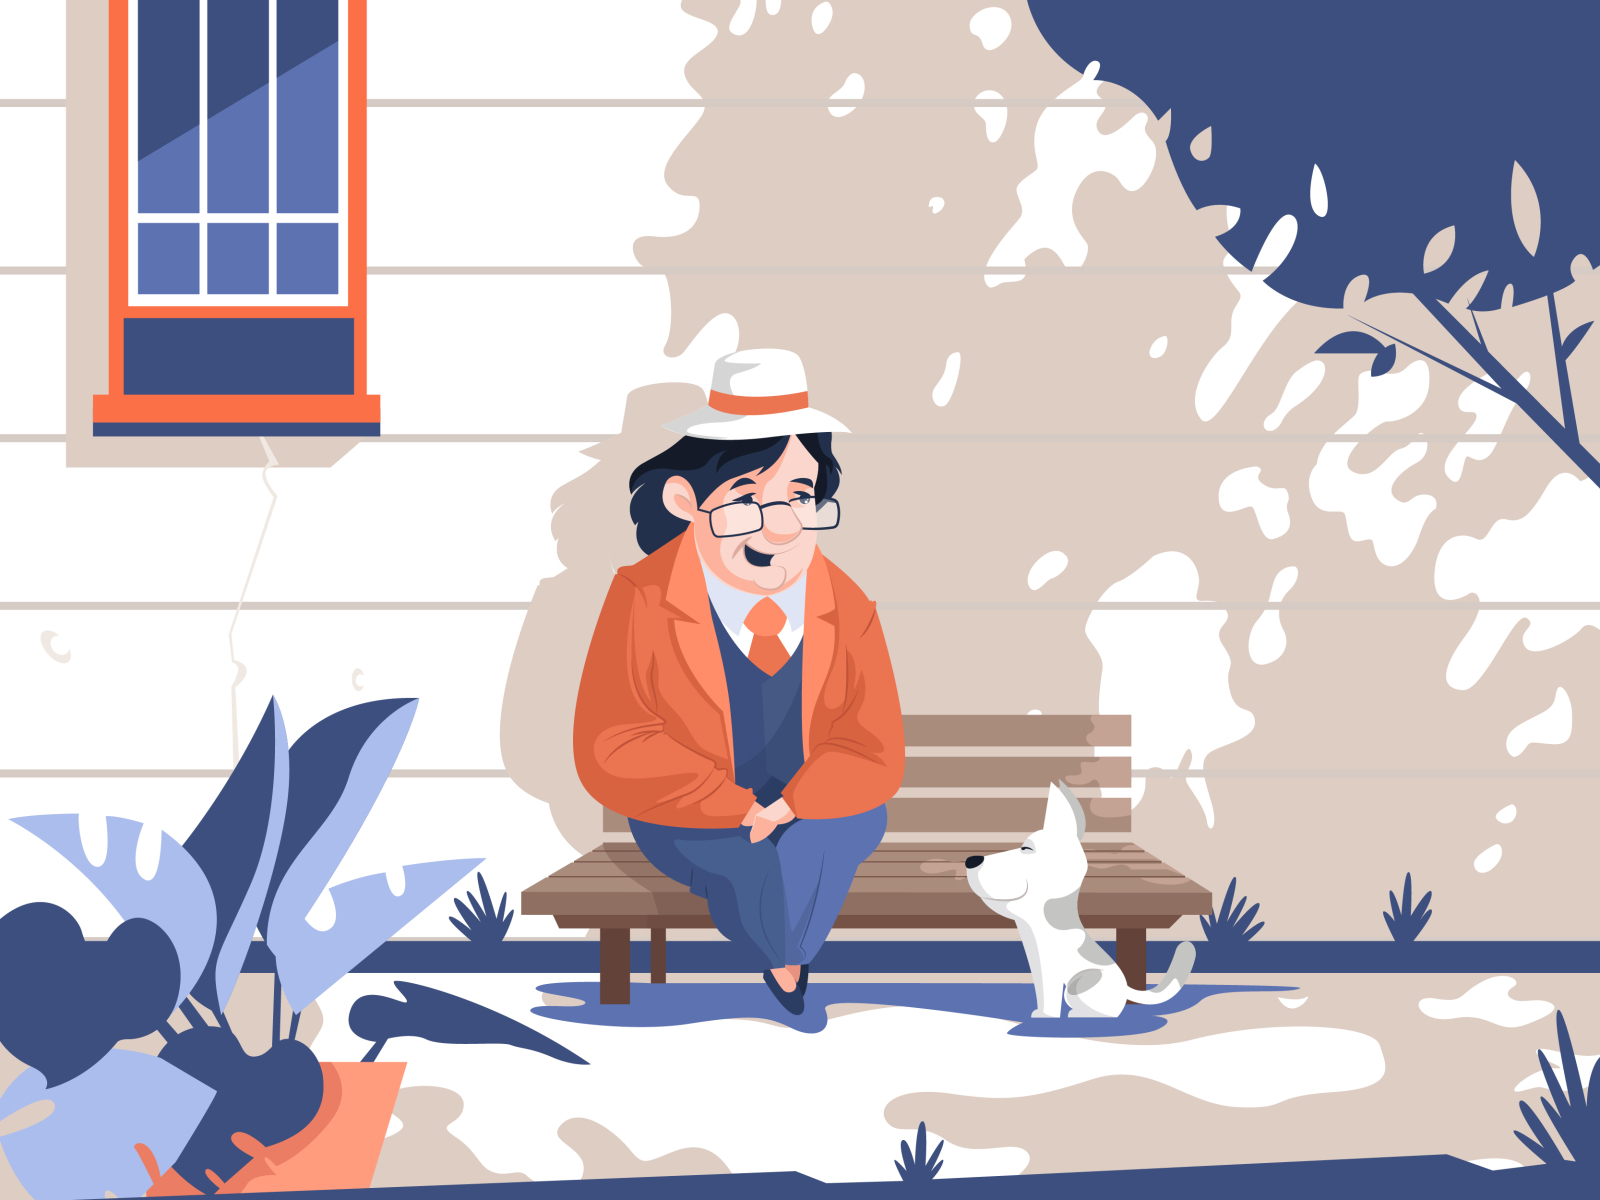 Woman Sitting With Cute Puppy by shivani rana on Dribbble